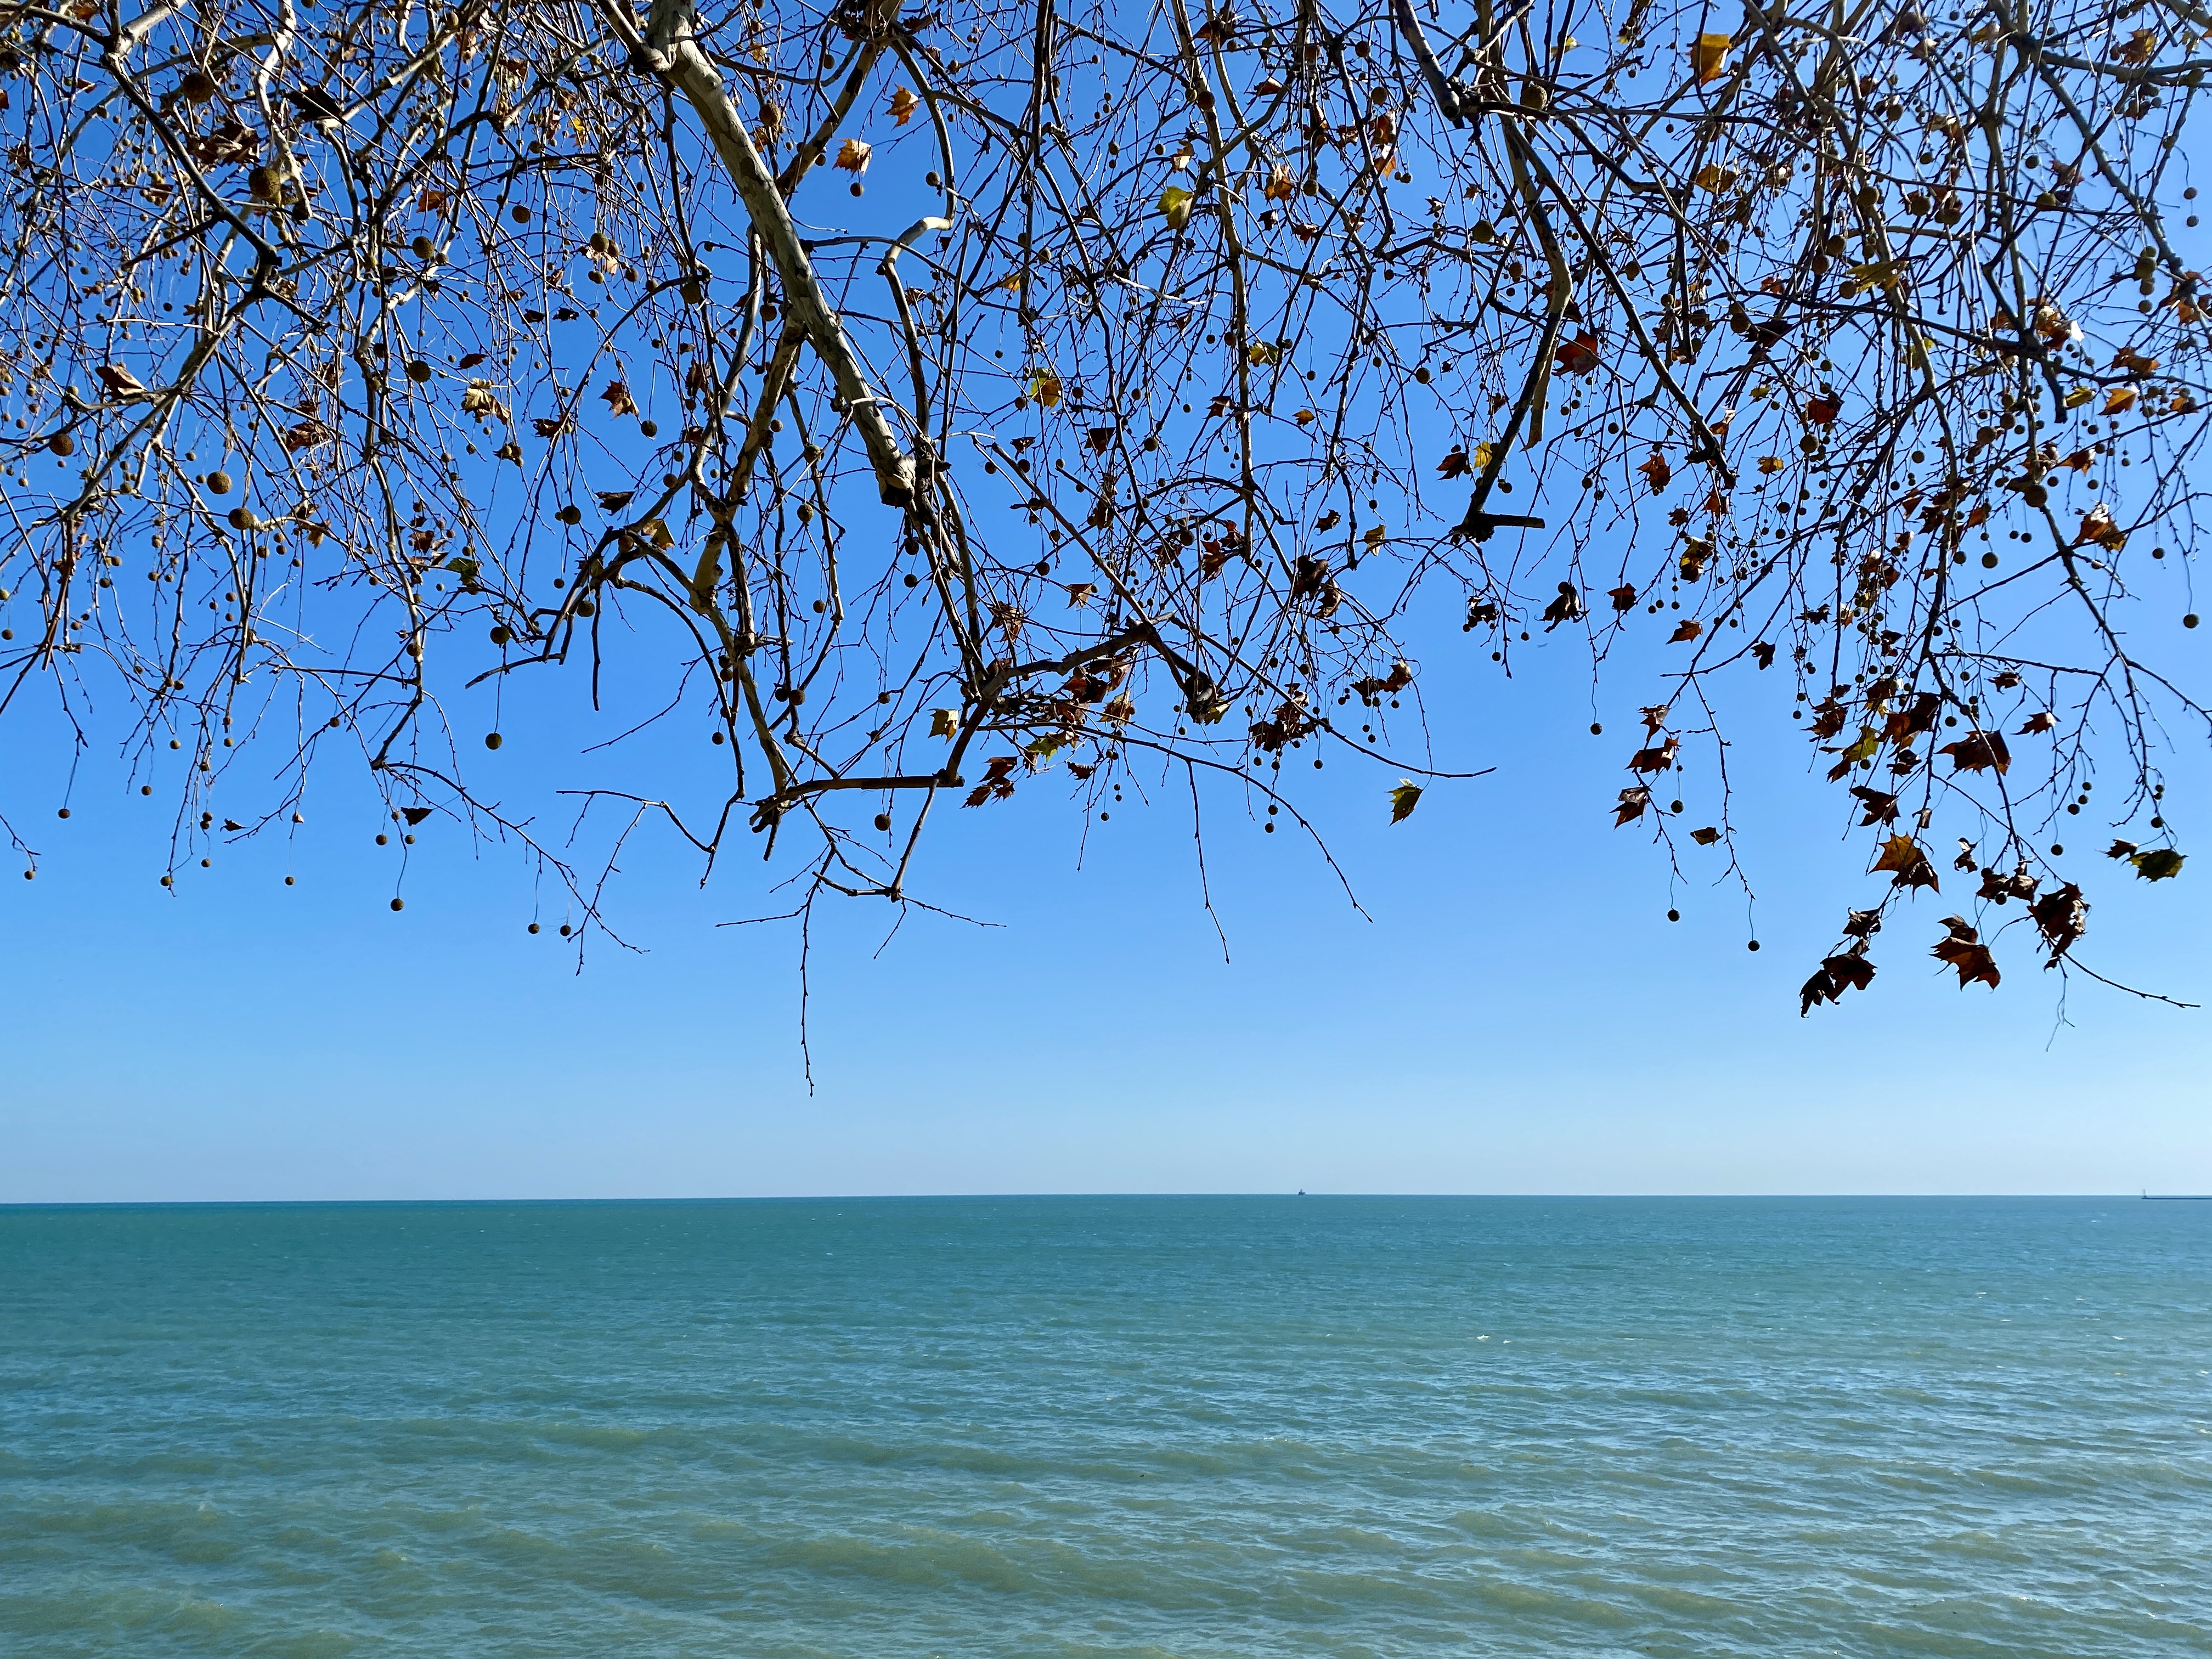 A wide pale green lake with soft waves and a deep blue sky behind tree branches, almost free of leaves, dipping down